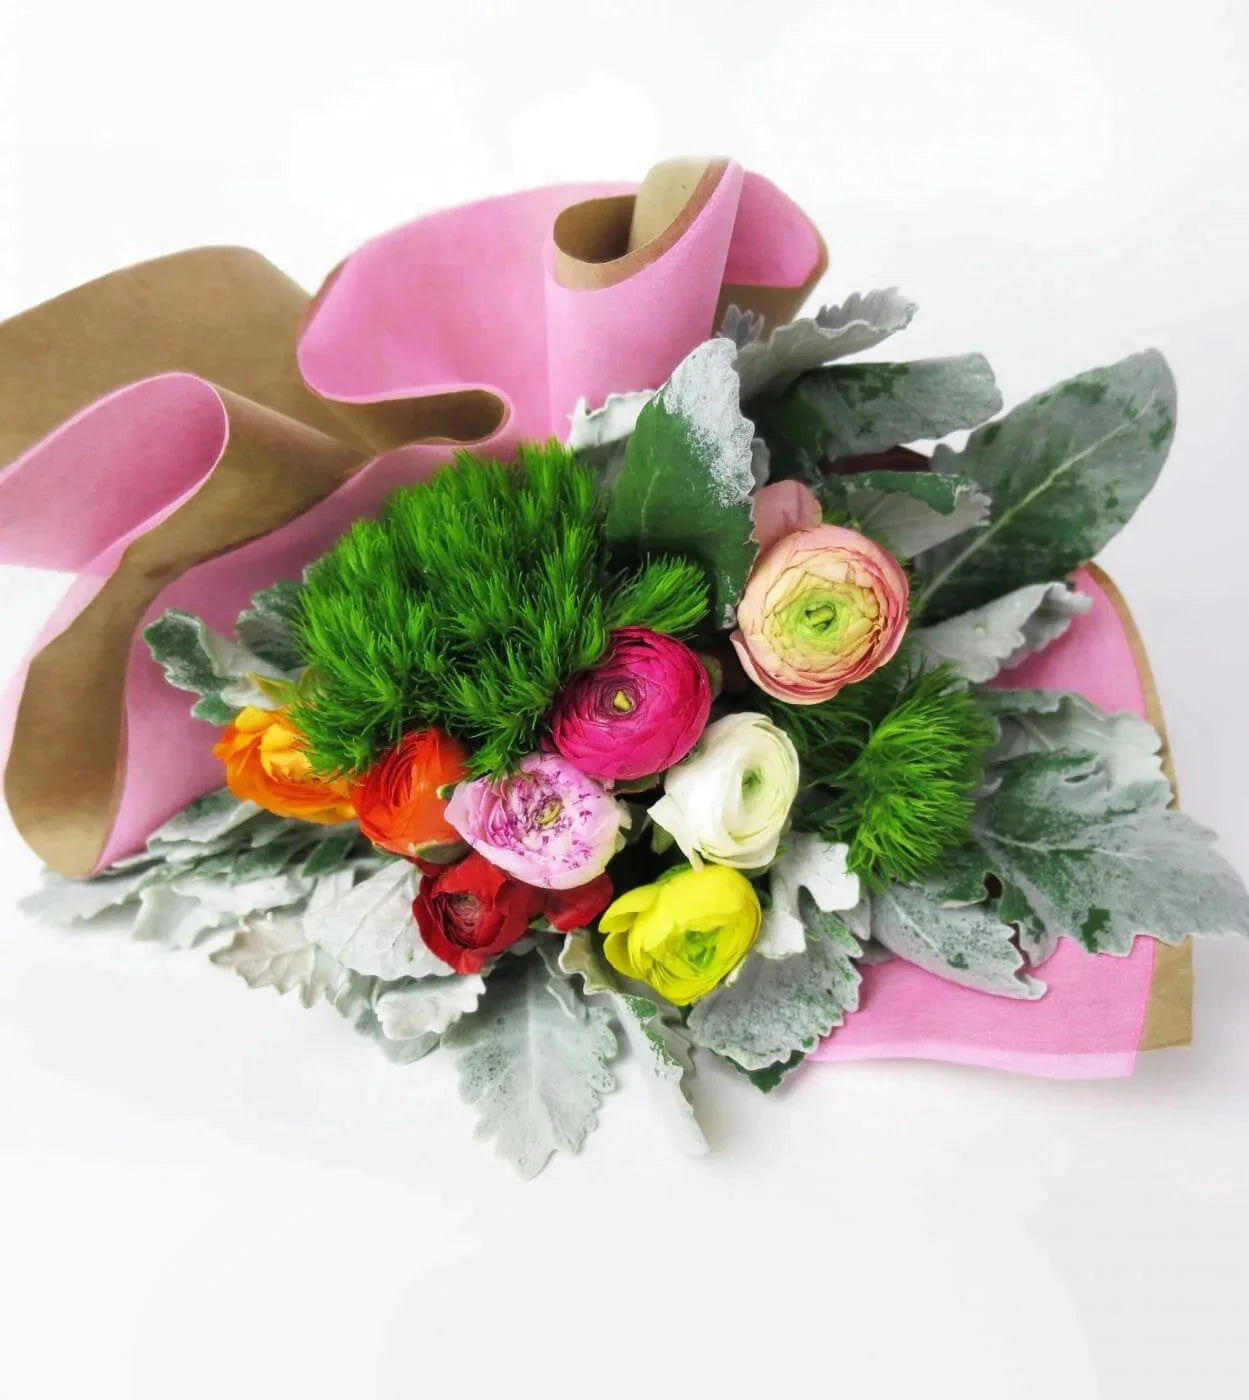 Bubblegum Hues™ Bouquet - Bright Ranunculus becomes even more vibrant with green dianthus and dusty miller